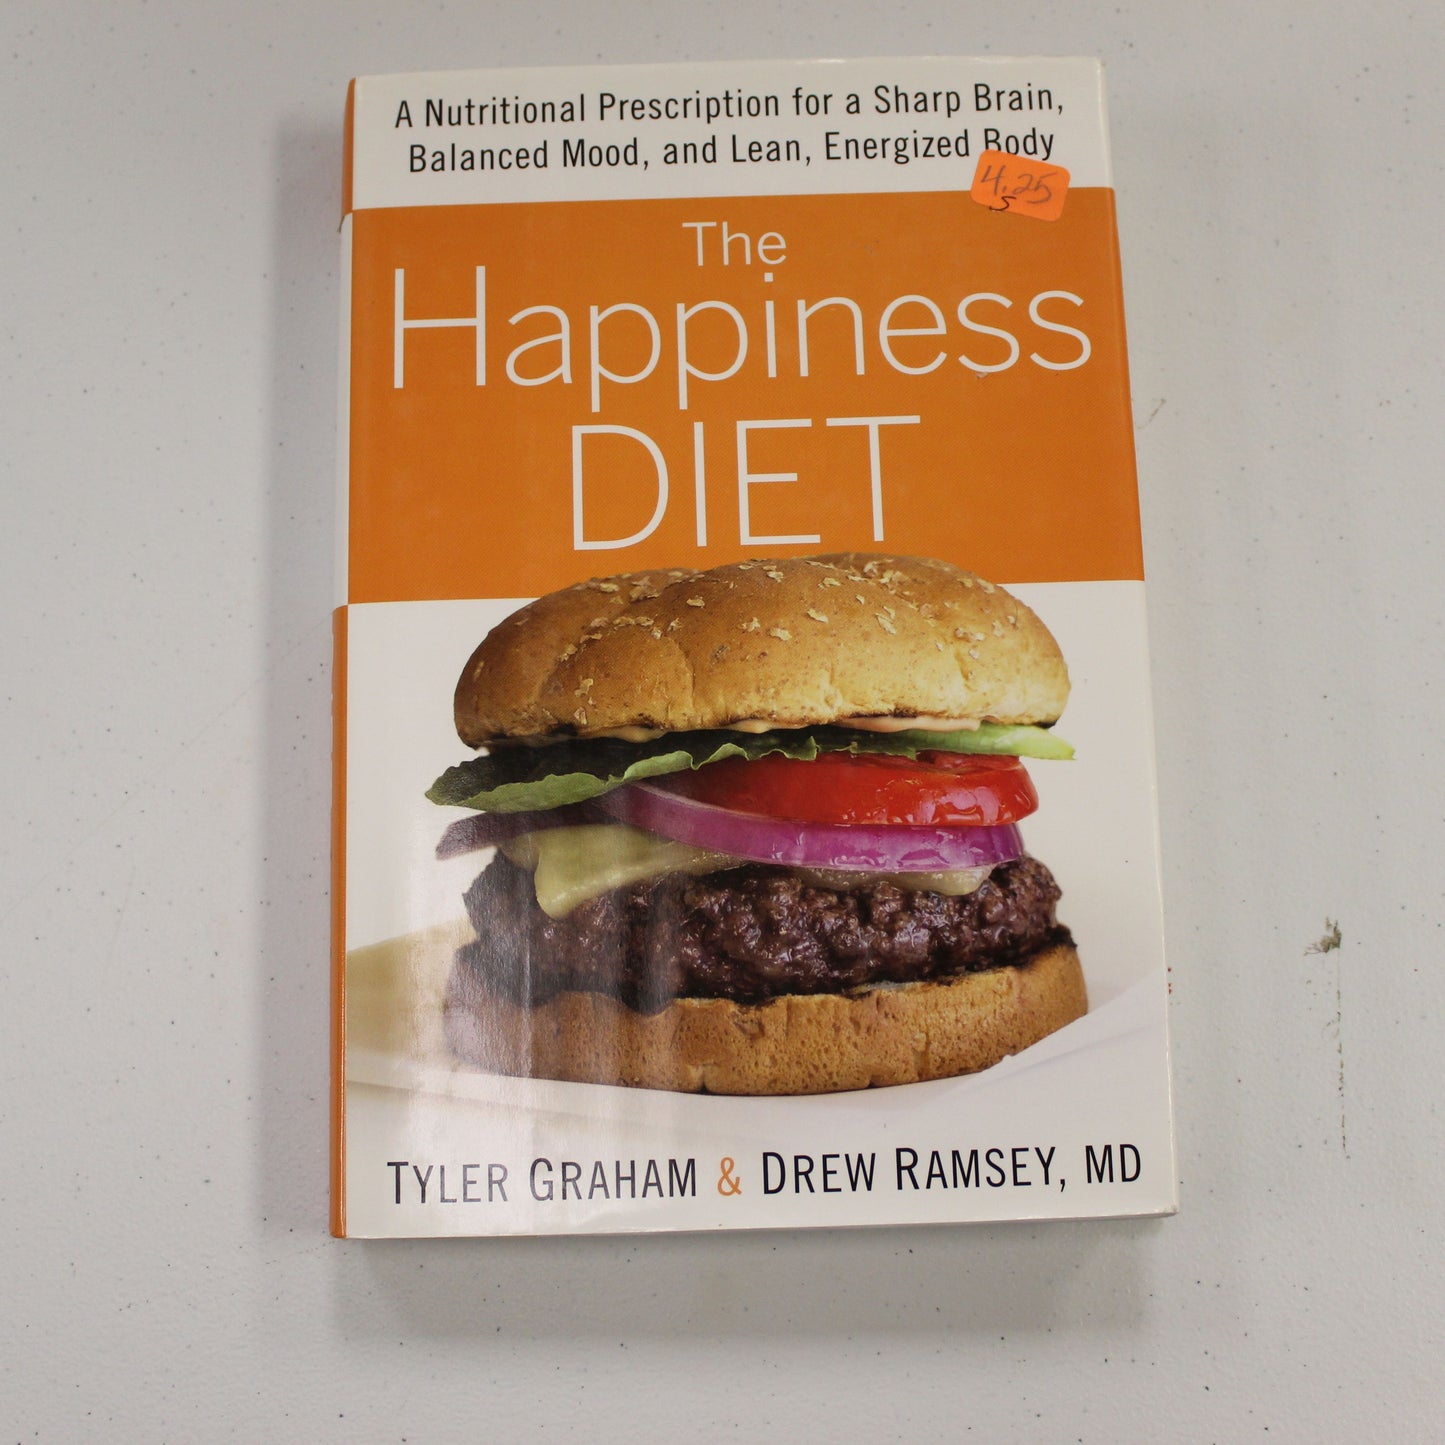 THE HAPPINESS DIET